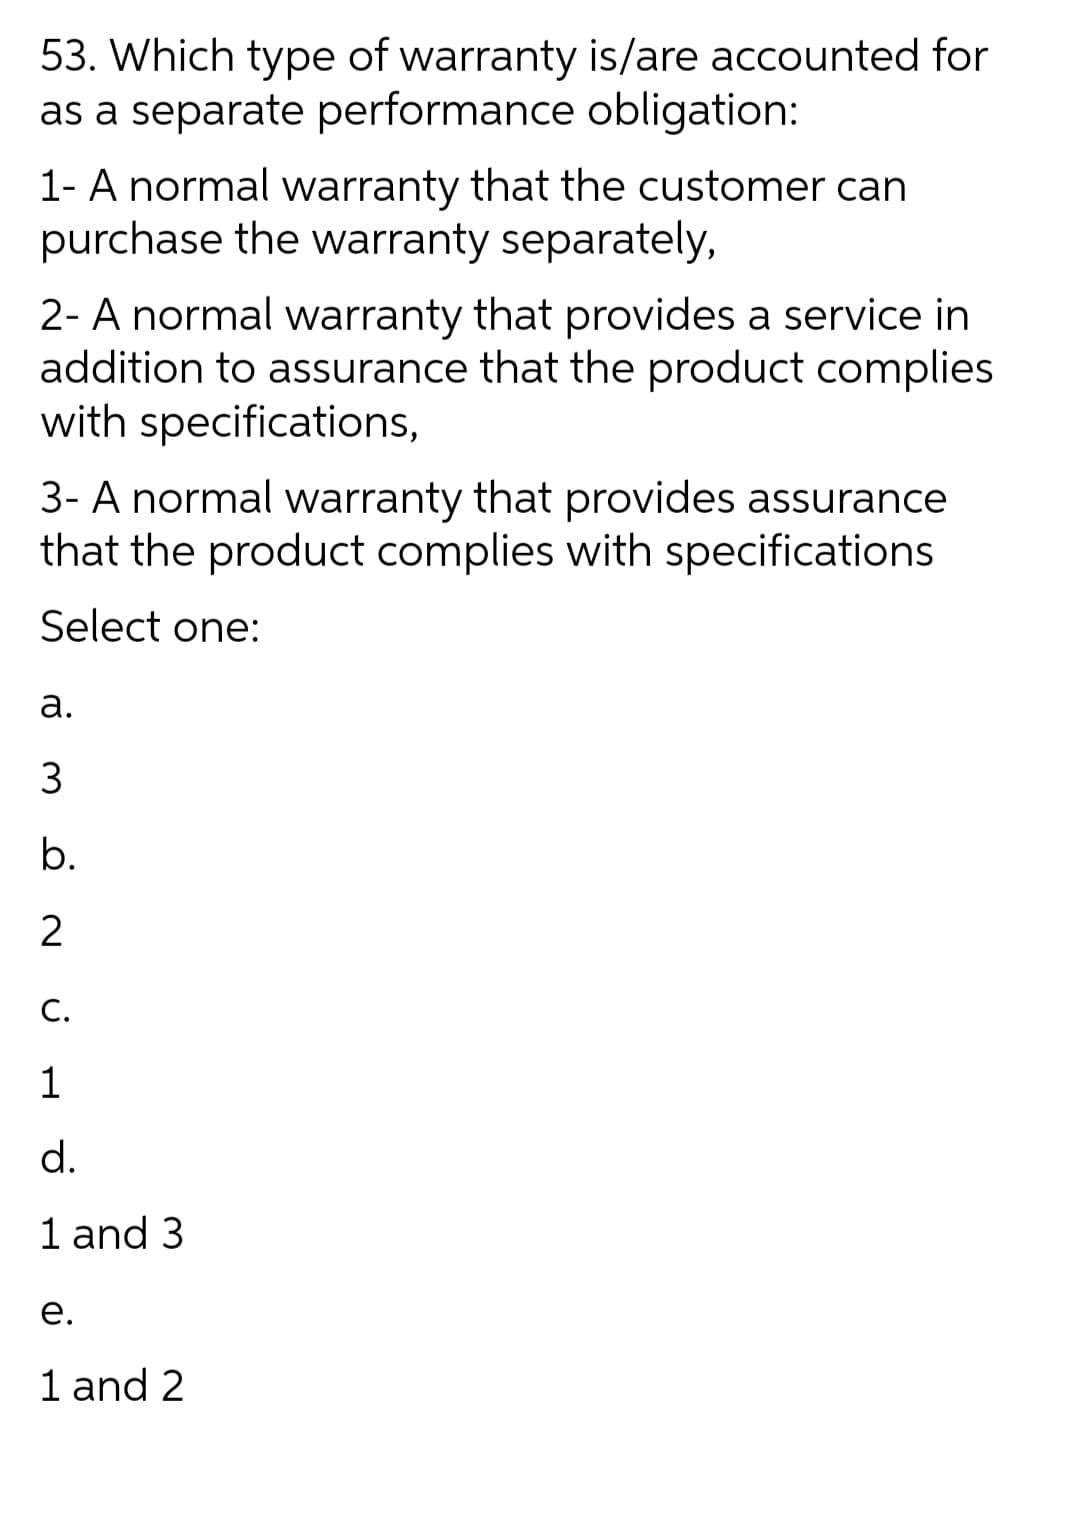 53. Which type of warranty is/are accounted for
as a separate performance obligation:
1- A normal warranty that the customer can
purchase the warranty separately,
2- A normal warranty that provides a service in
addition to assurance that the product complies
with specifications,
3- A normal warranty that provides assurance
that the product complies with specifications
Select one:
а.
b.
2
C.
1
d.
1 and 3
е.
1 and 2
